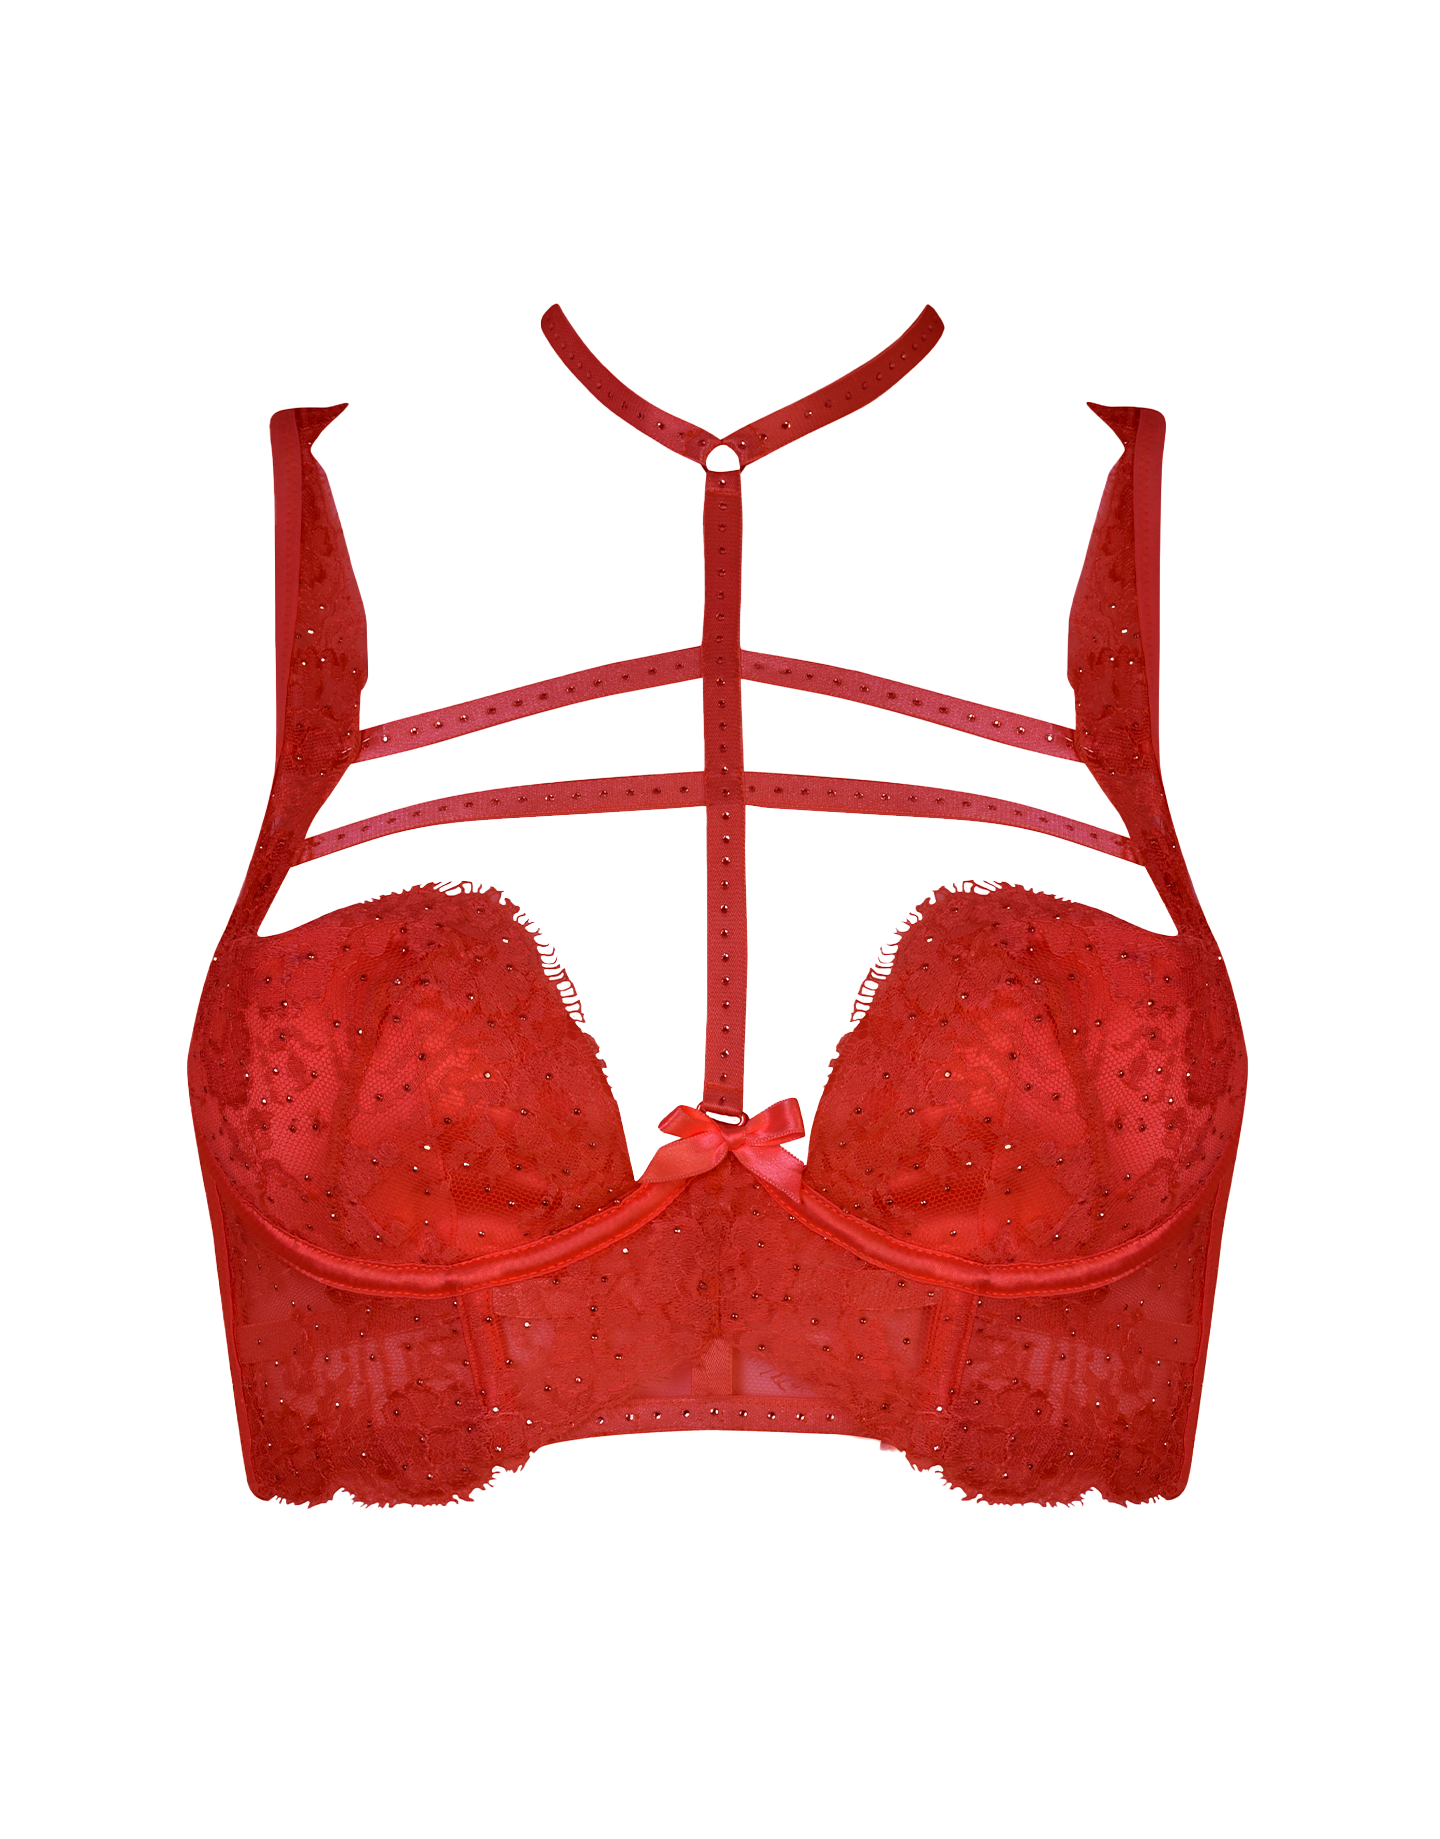 Davinah High Neck Bra in Red | By Agent Provocateur patest